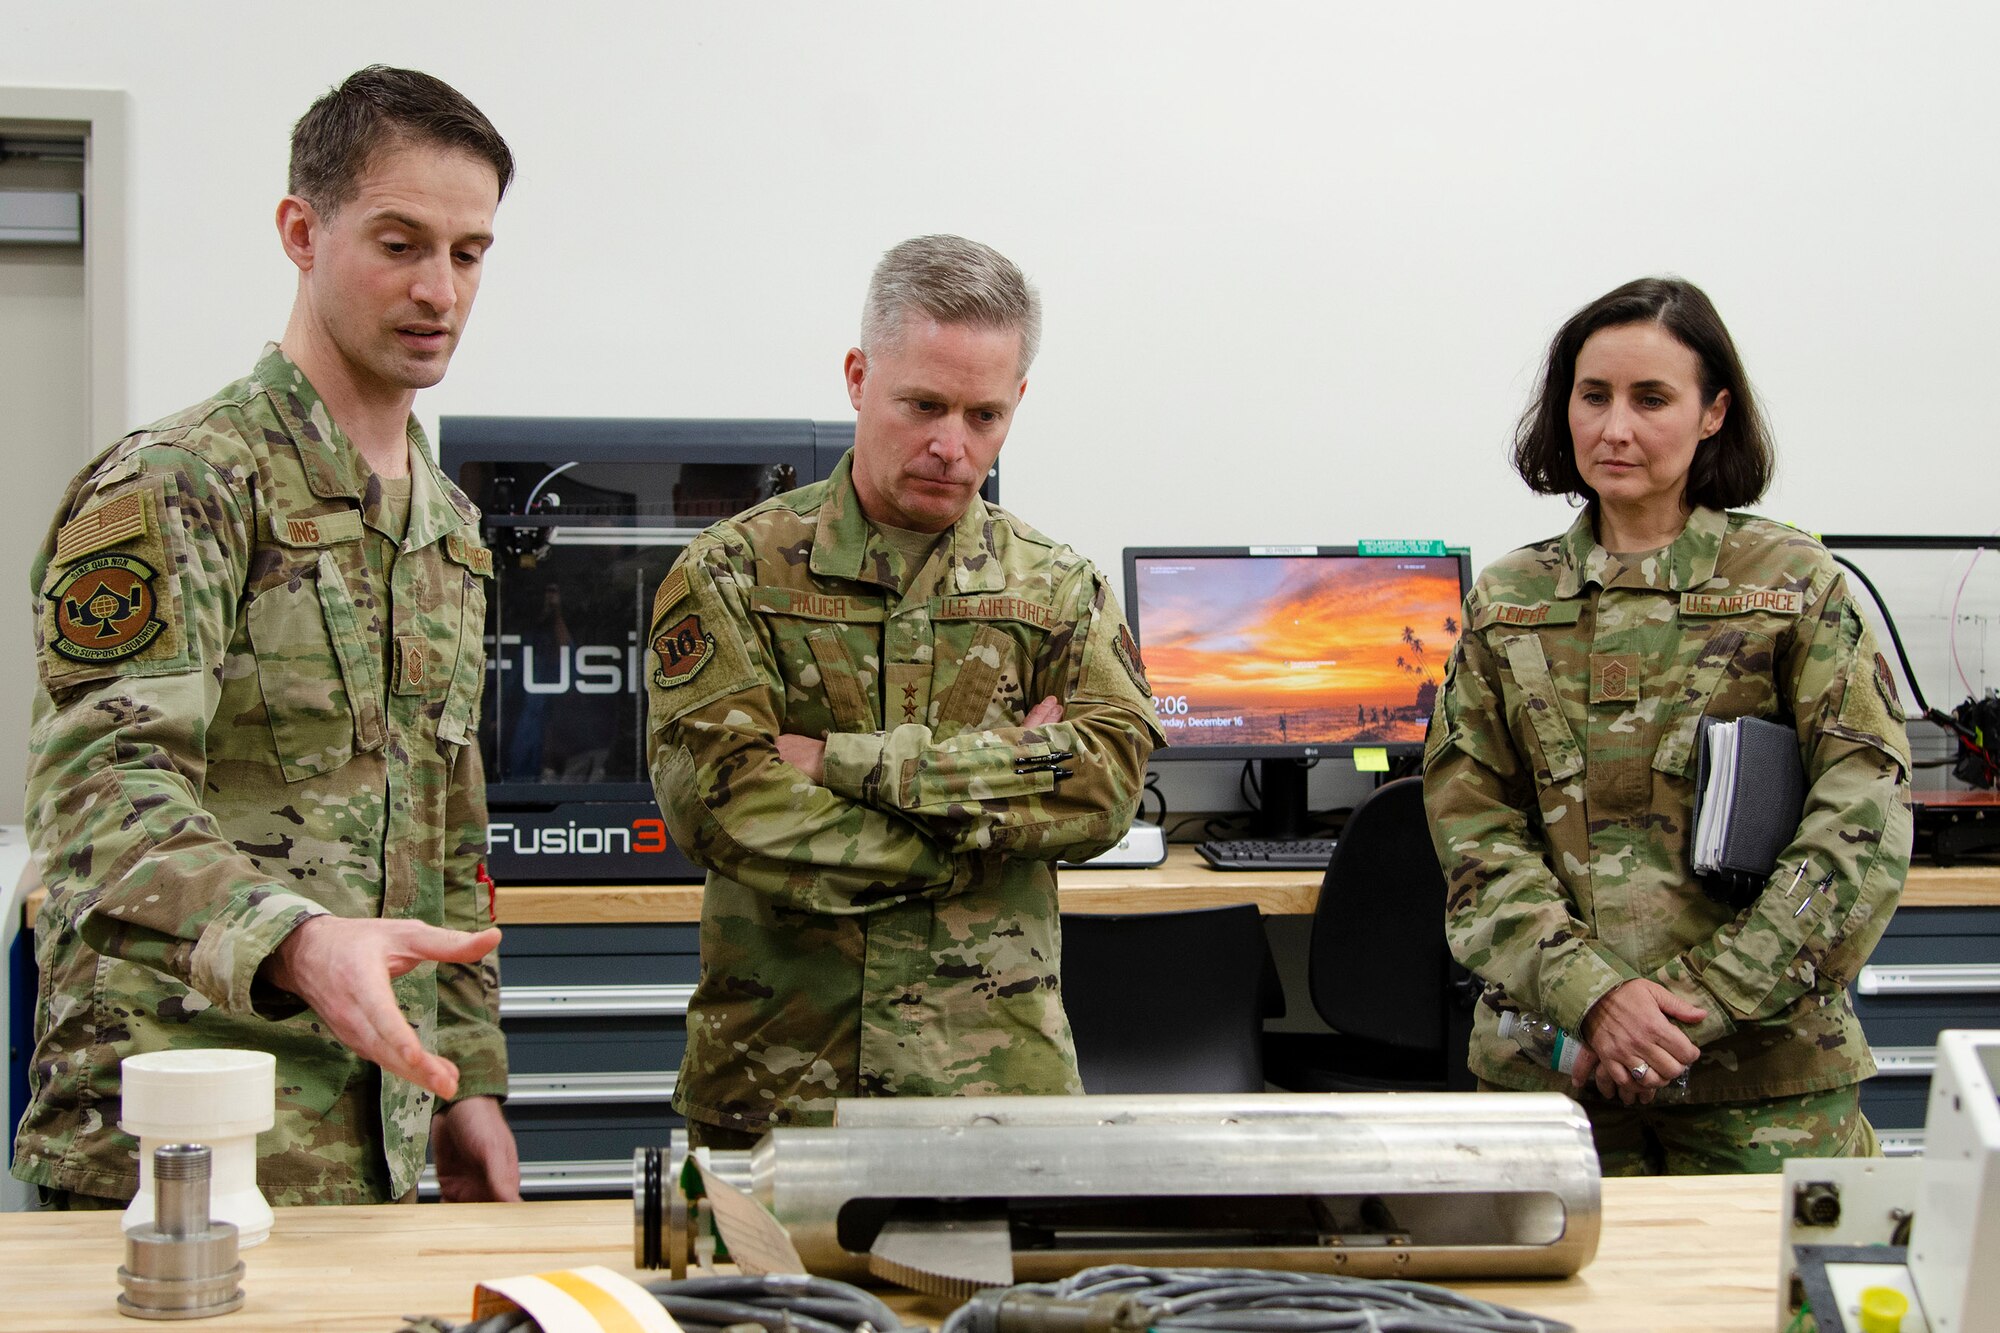 Master Sgt. Joseph King (left), superintendent of maintenance operations at the Air Force Technical Applications Center's Central Repair Facility, explains to 16th Air Force (Air Forces Cyber) Commander Lt. Gen. Timothy Haugh and 16th AF Command Chief Master Sgt. Summer Leifer how the CRF maintains its seismic equipment to execute AFTAC's global nuclear treaty monitoring mission.  The 16th AF leaders visited Patrick AFB, Fla., Dec. 16, 2019.  (U.S. Air Force photo by Susan A. Romano)